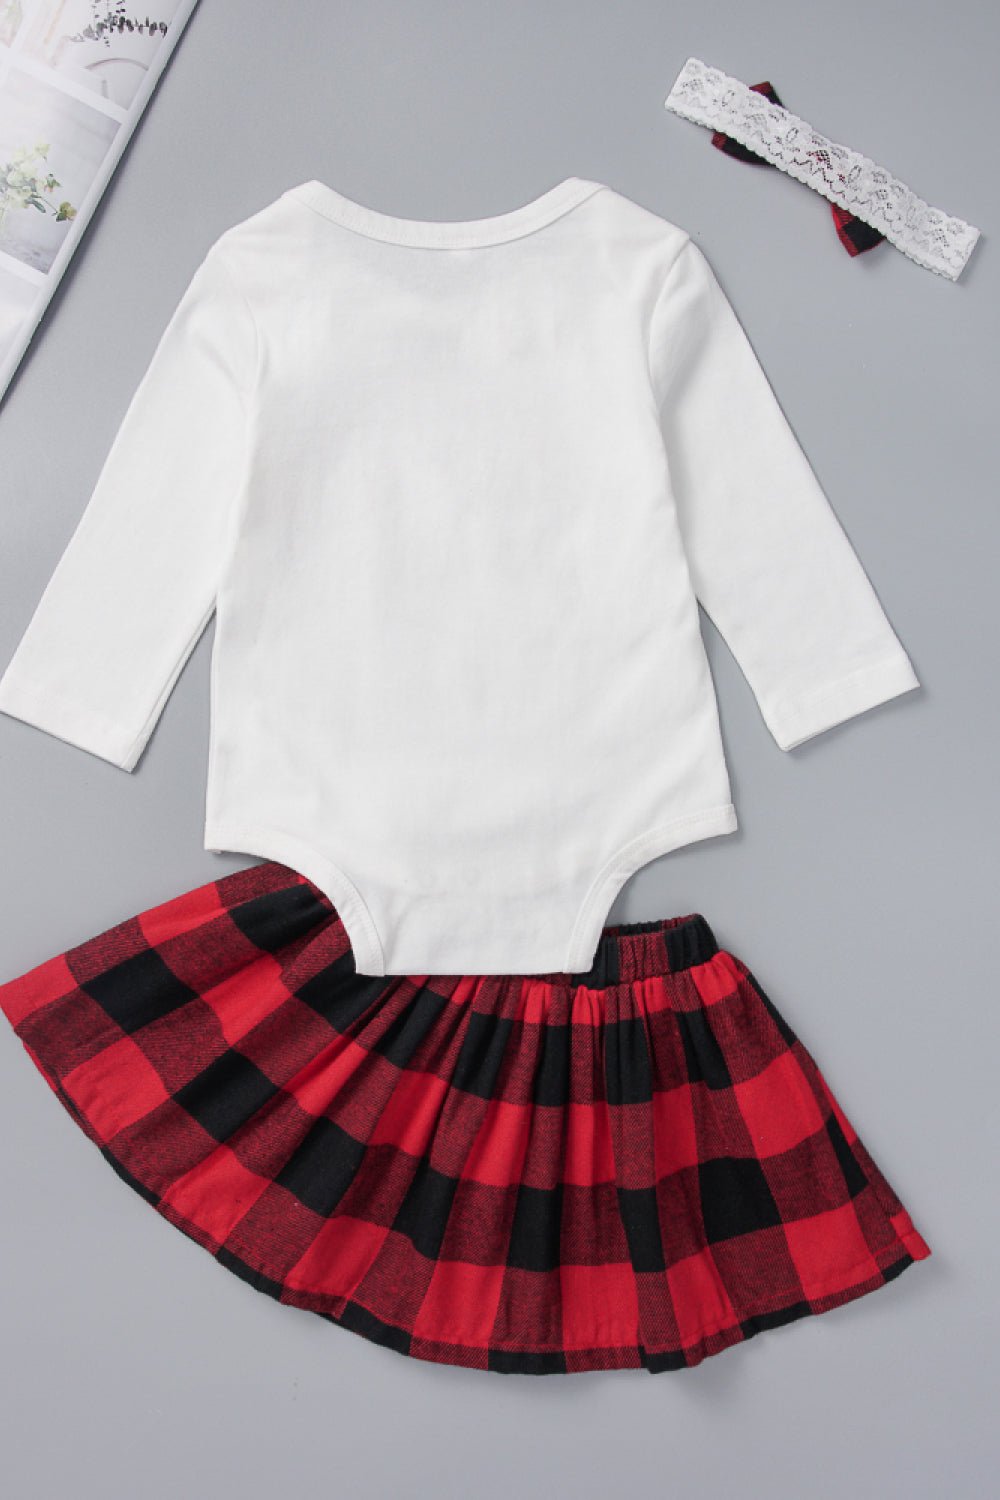 Baby Girls' Christmas Bodysuit and Plaid Skirt Set with Bow - Fashion Girl Online Store